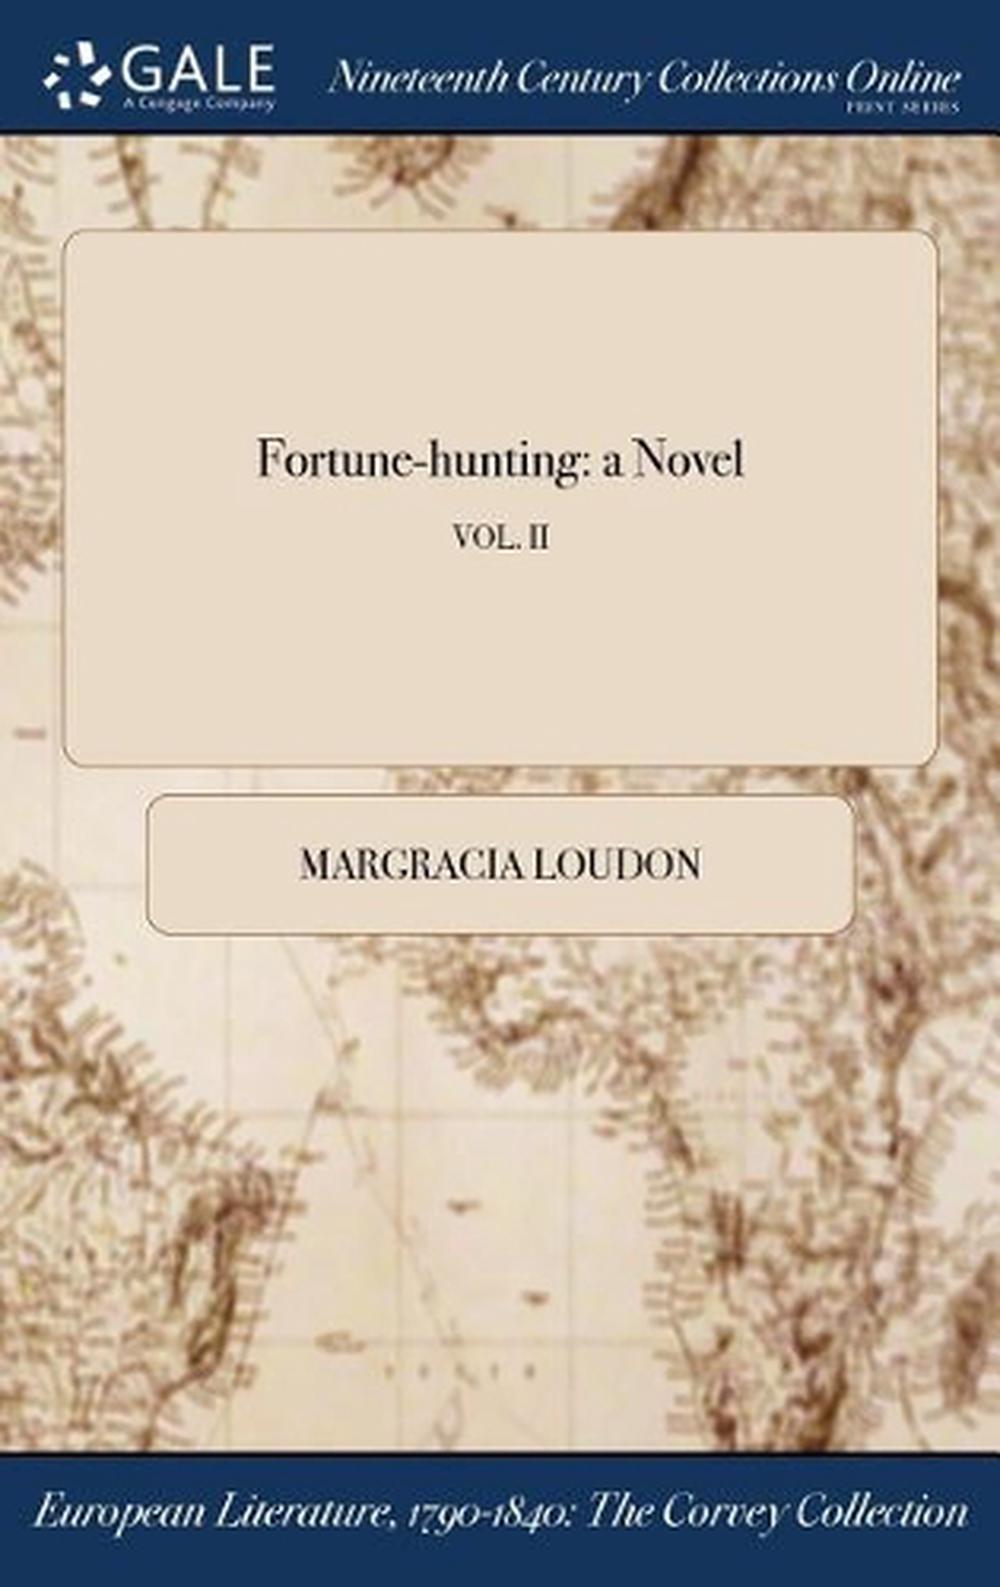 the gentle art of fortune hunting